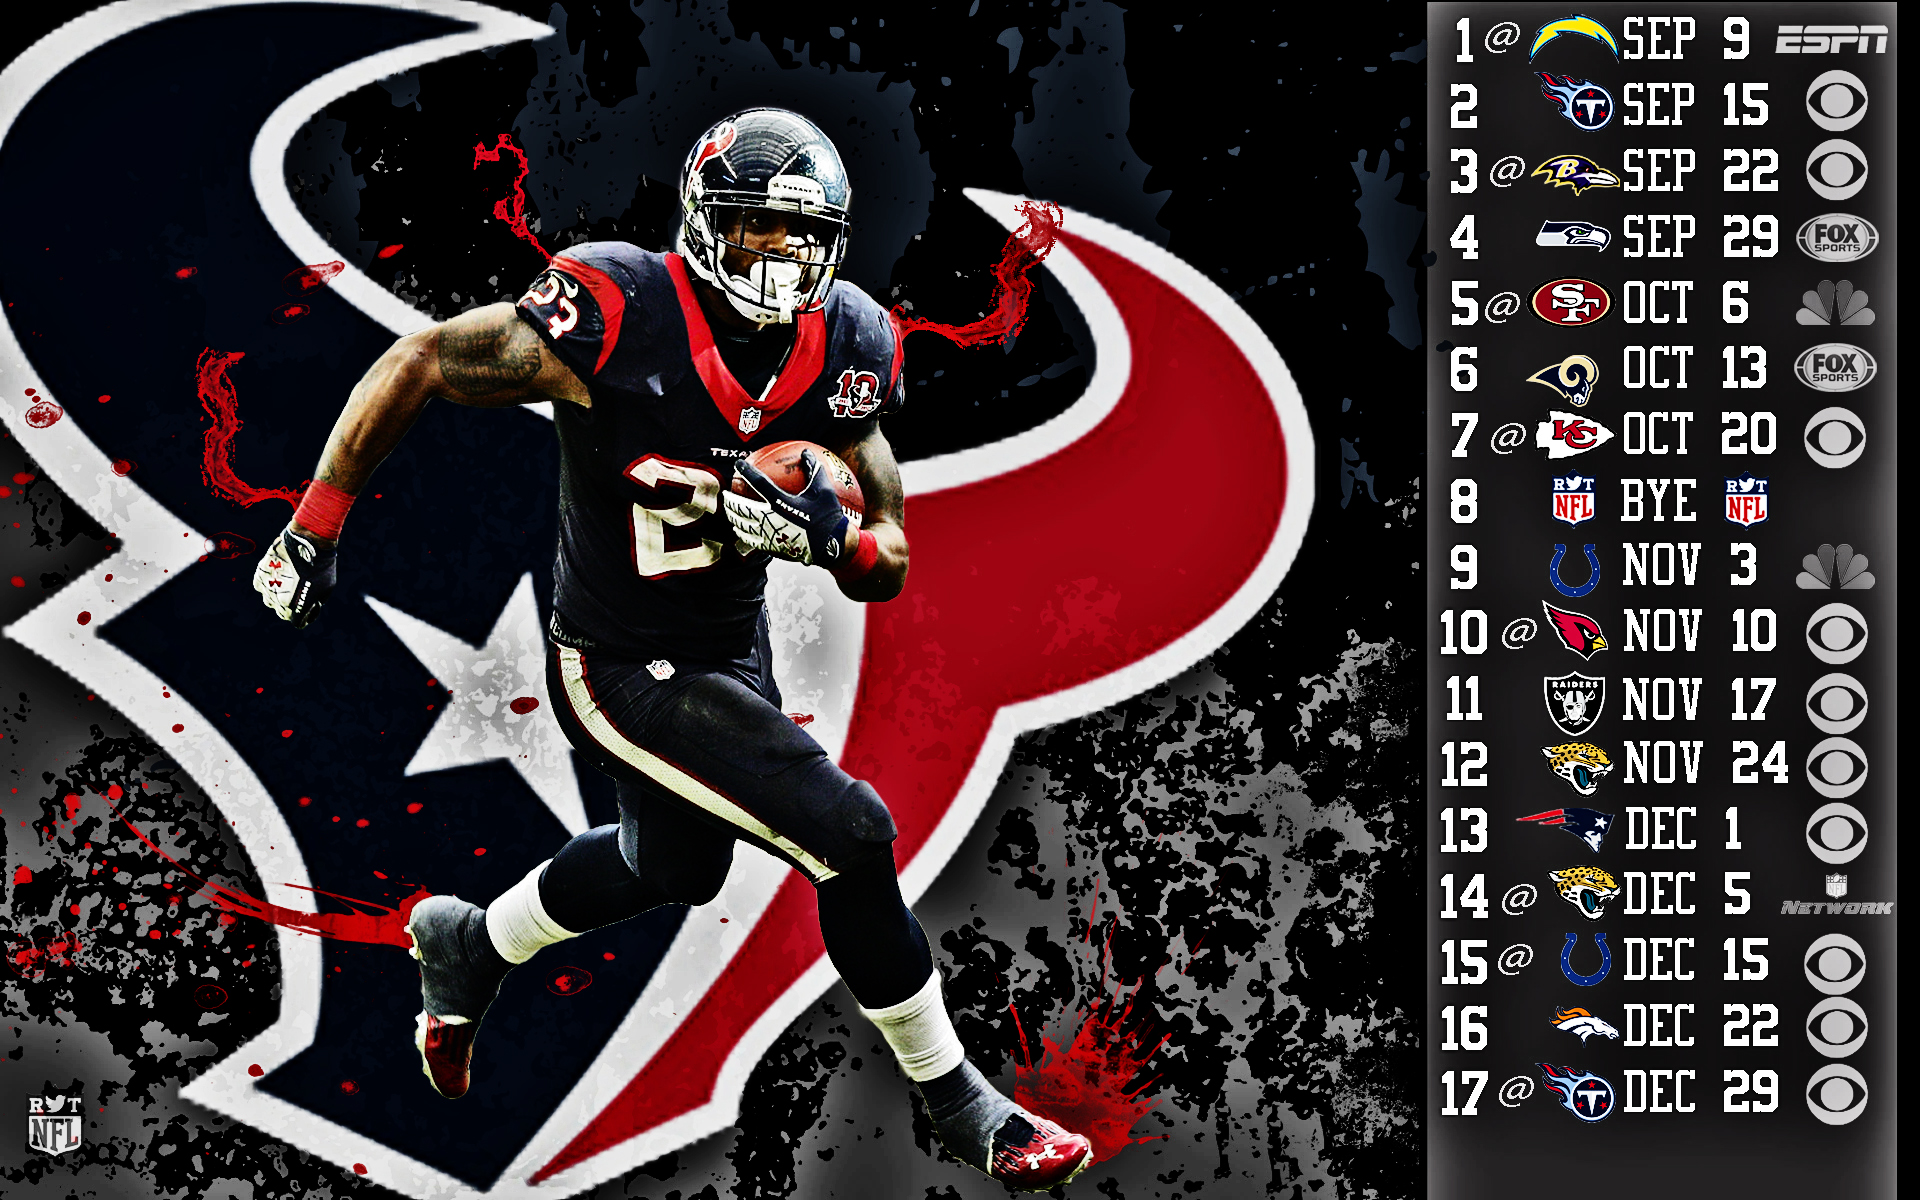 Arian Foster 2013 Schedule HDR